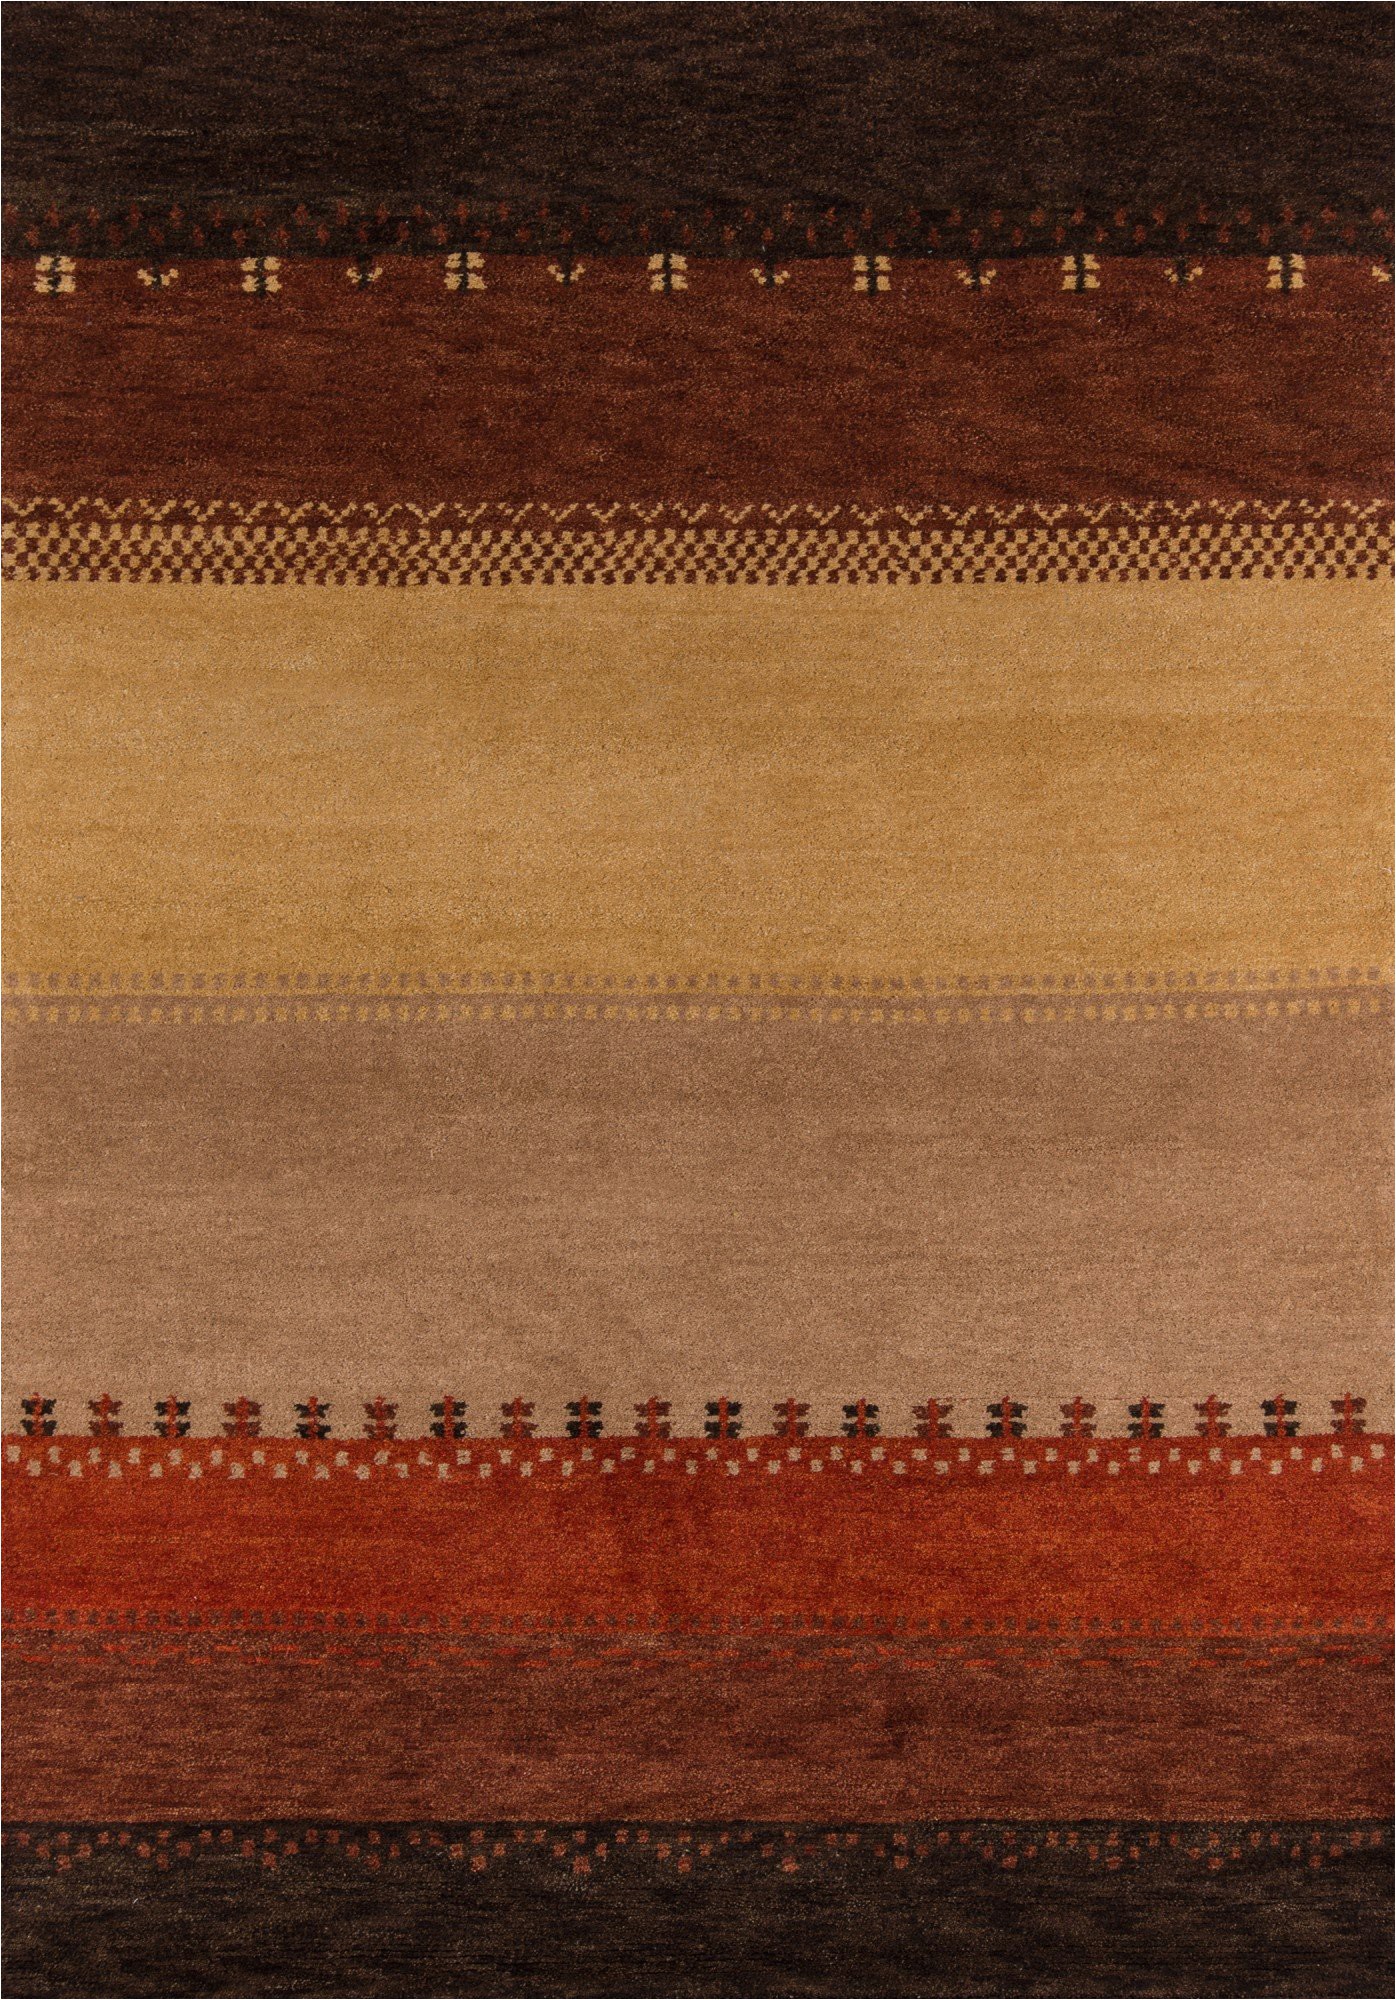 Red Brown and Tan area Rugs Momeni Desert Gabbeh Dg 04 area Rugs